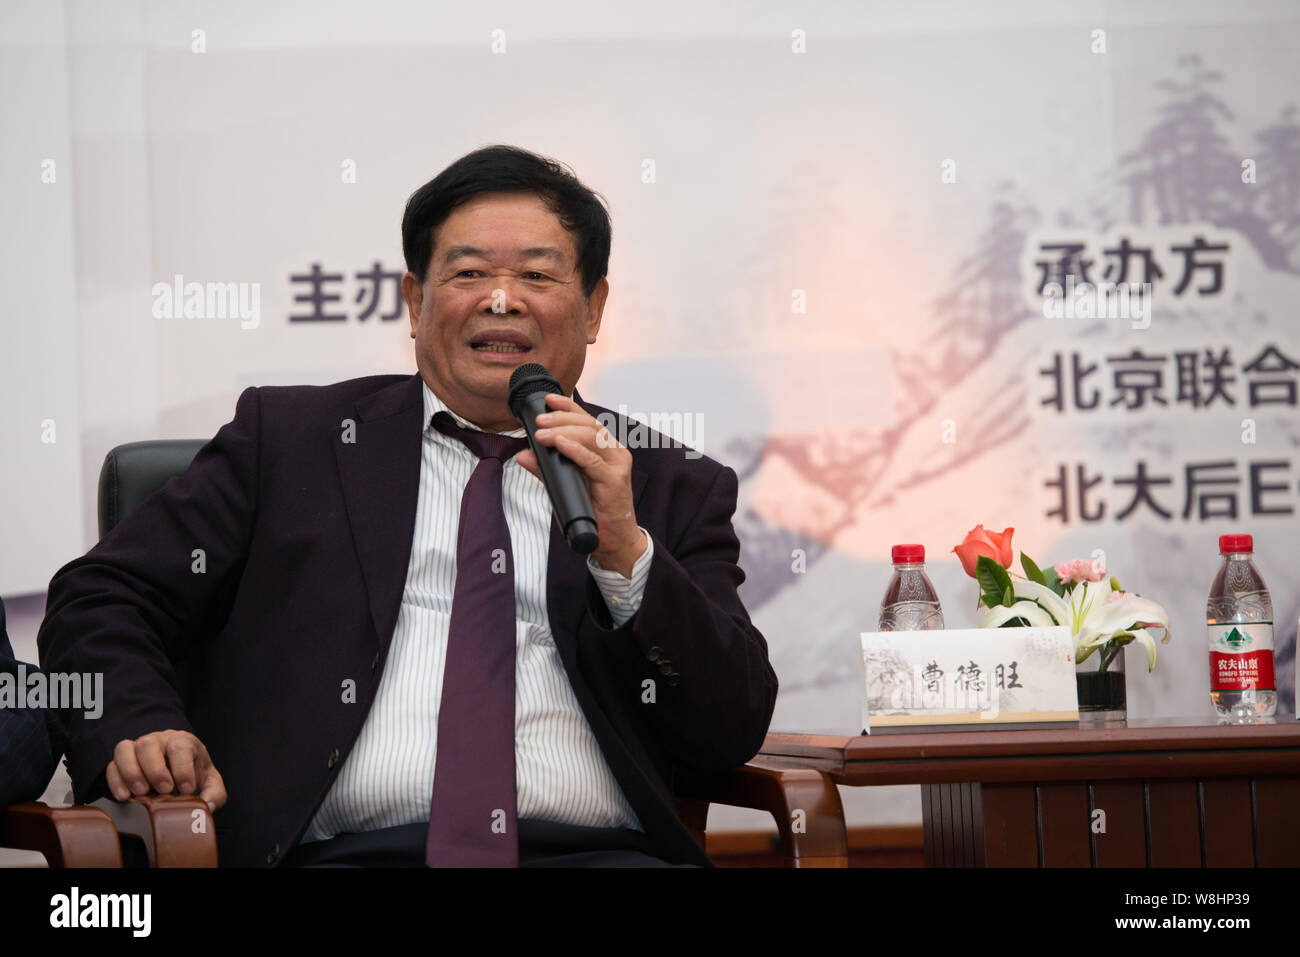 --FILE--Cho Tak Wong (Cao Dewang), Chairman of Fuyao Group and Chairman of Fuyao Glass Industry Group Co., Ltd., speaks at a press conference for his Stock Photo